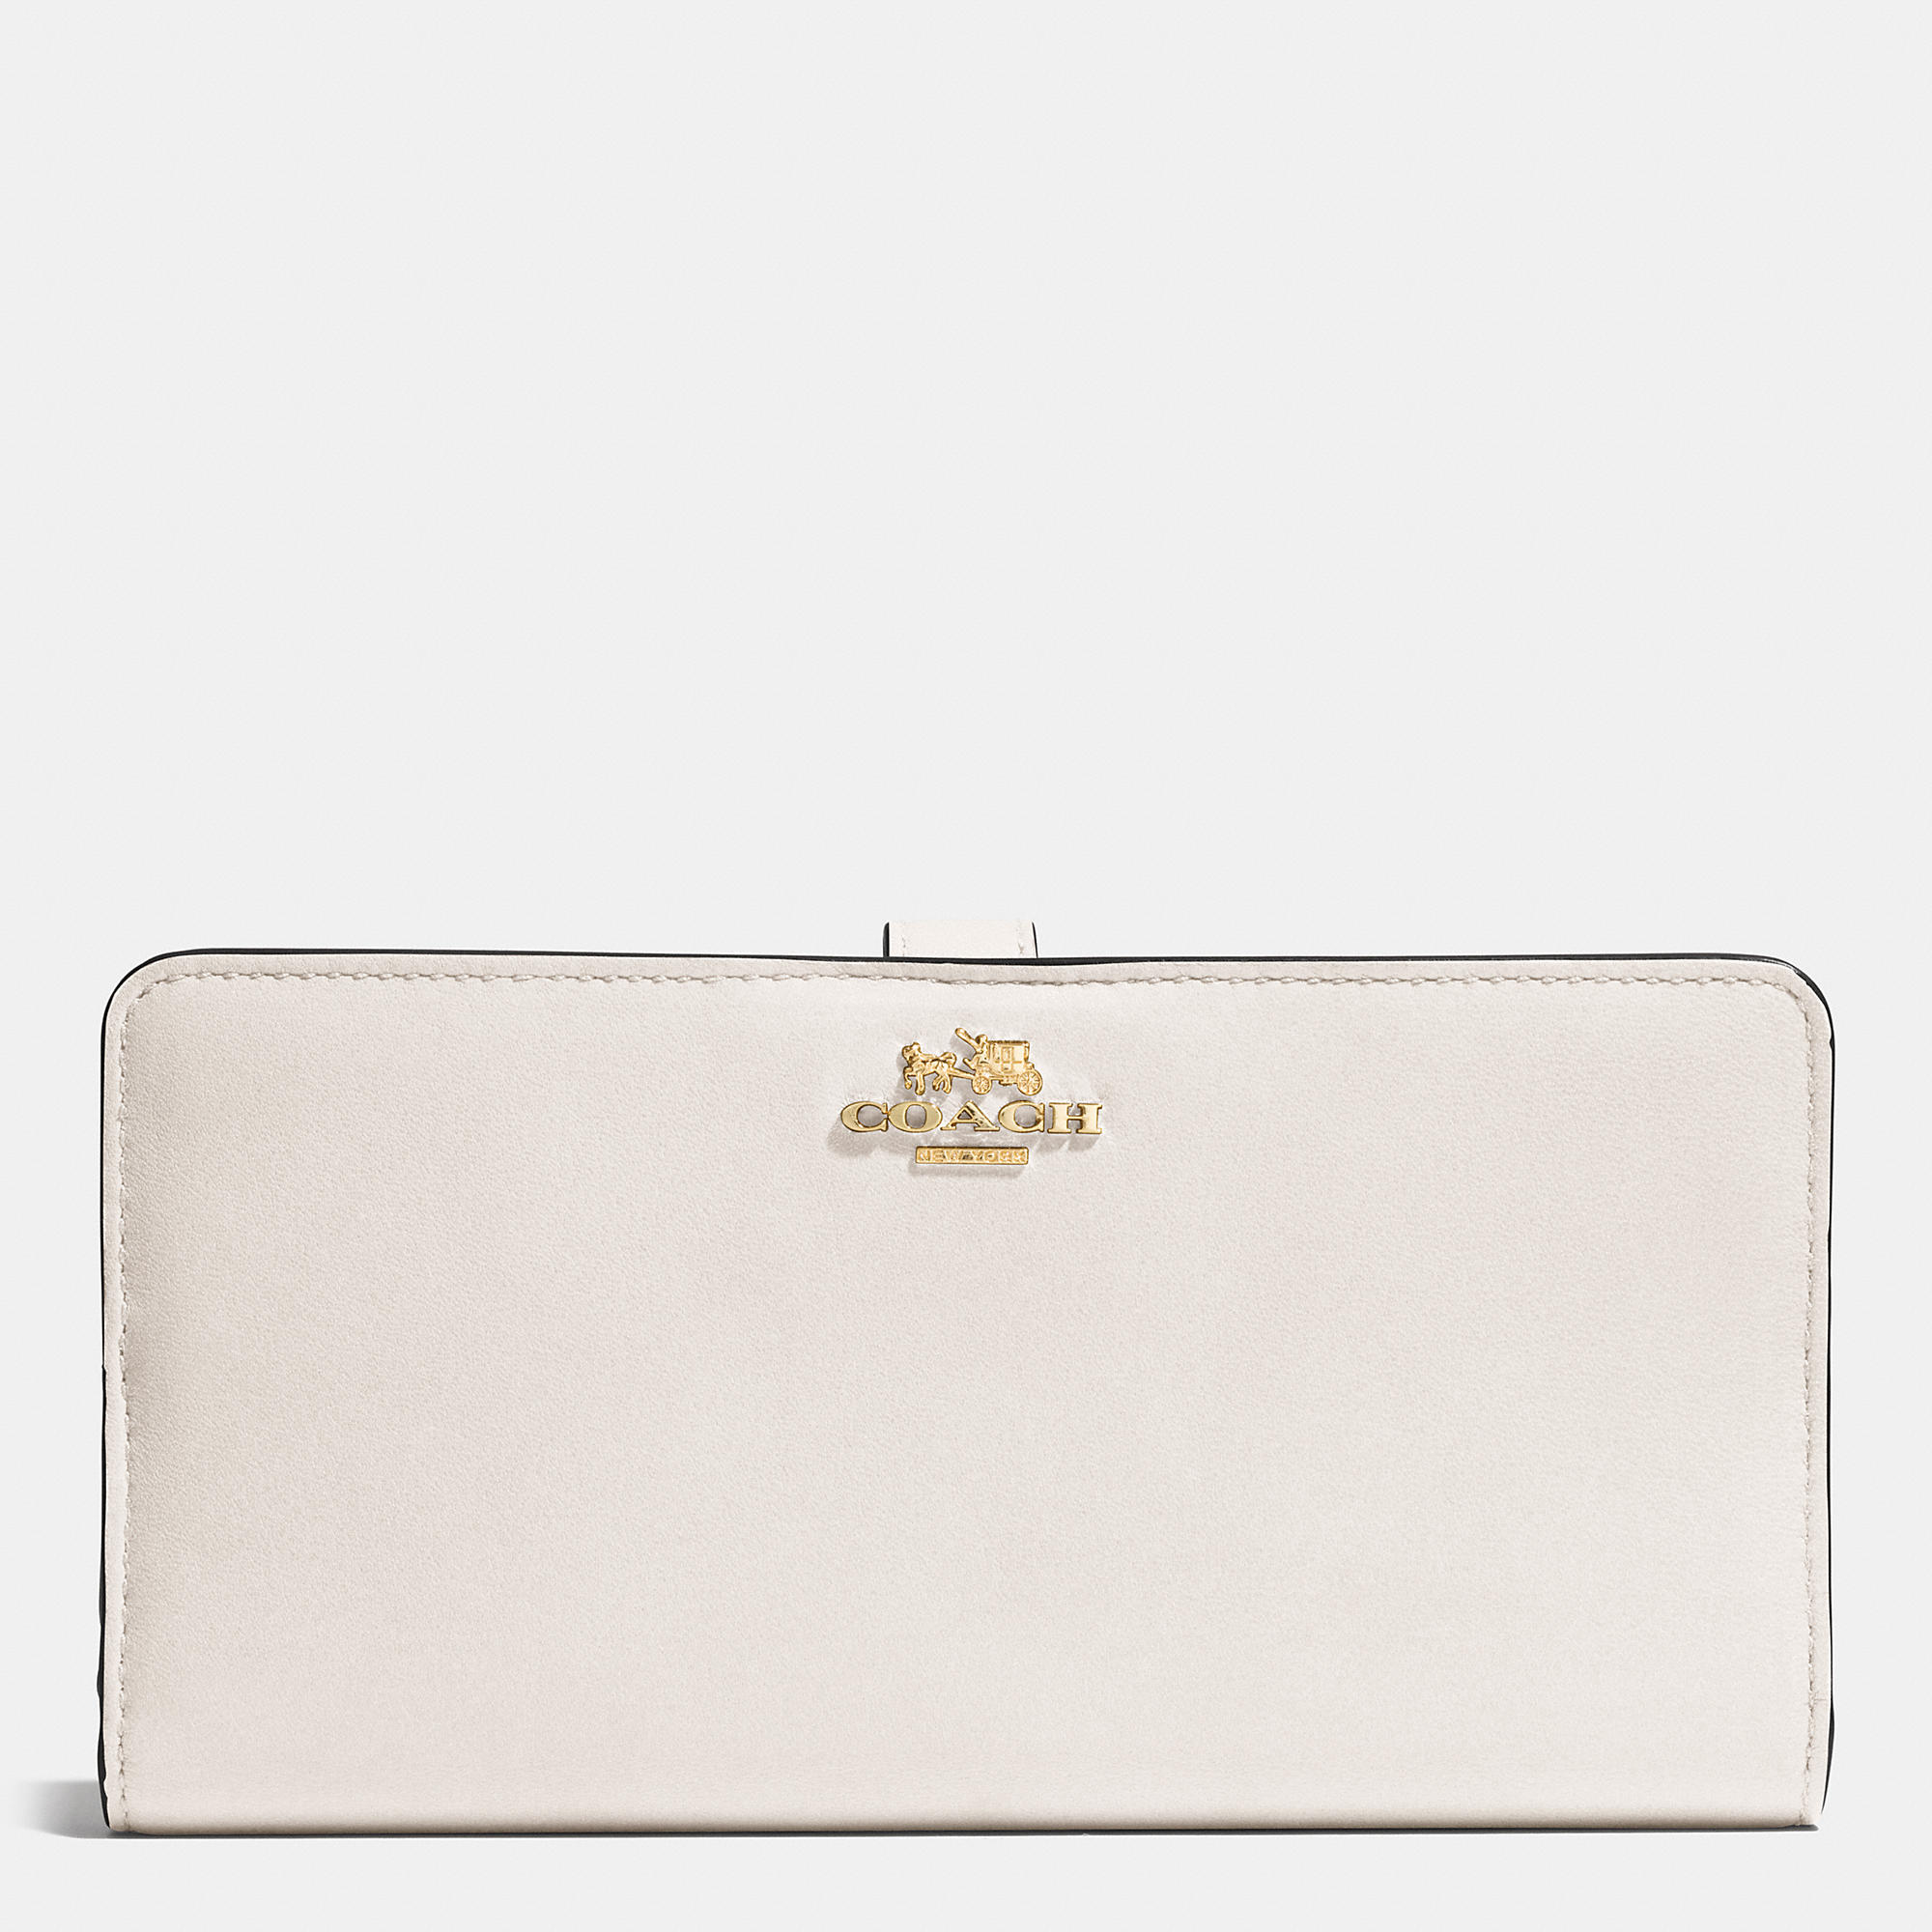 Coach Skinny Wallet In Leather | Coach Outlet Canada